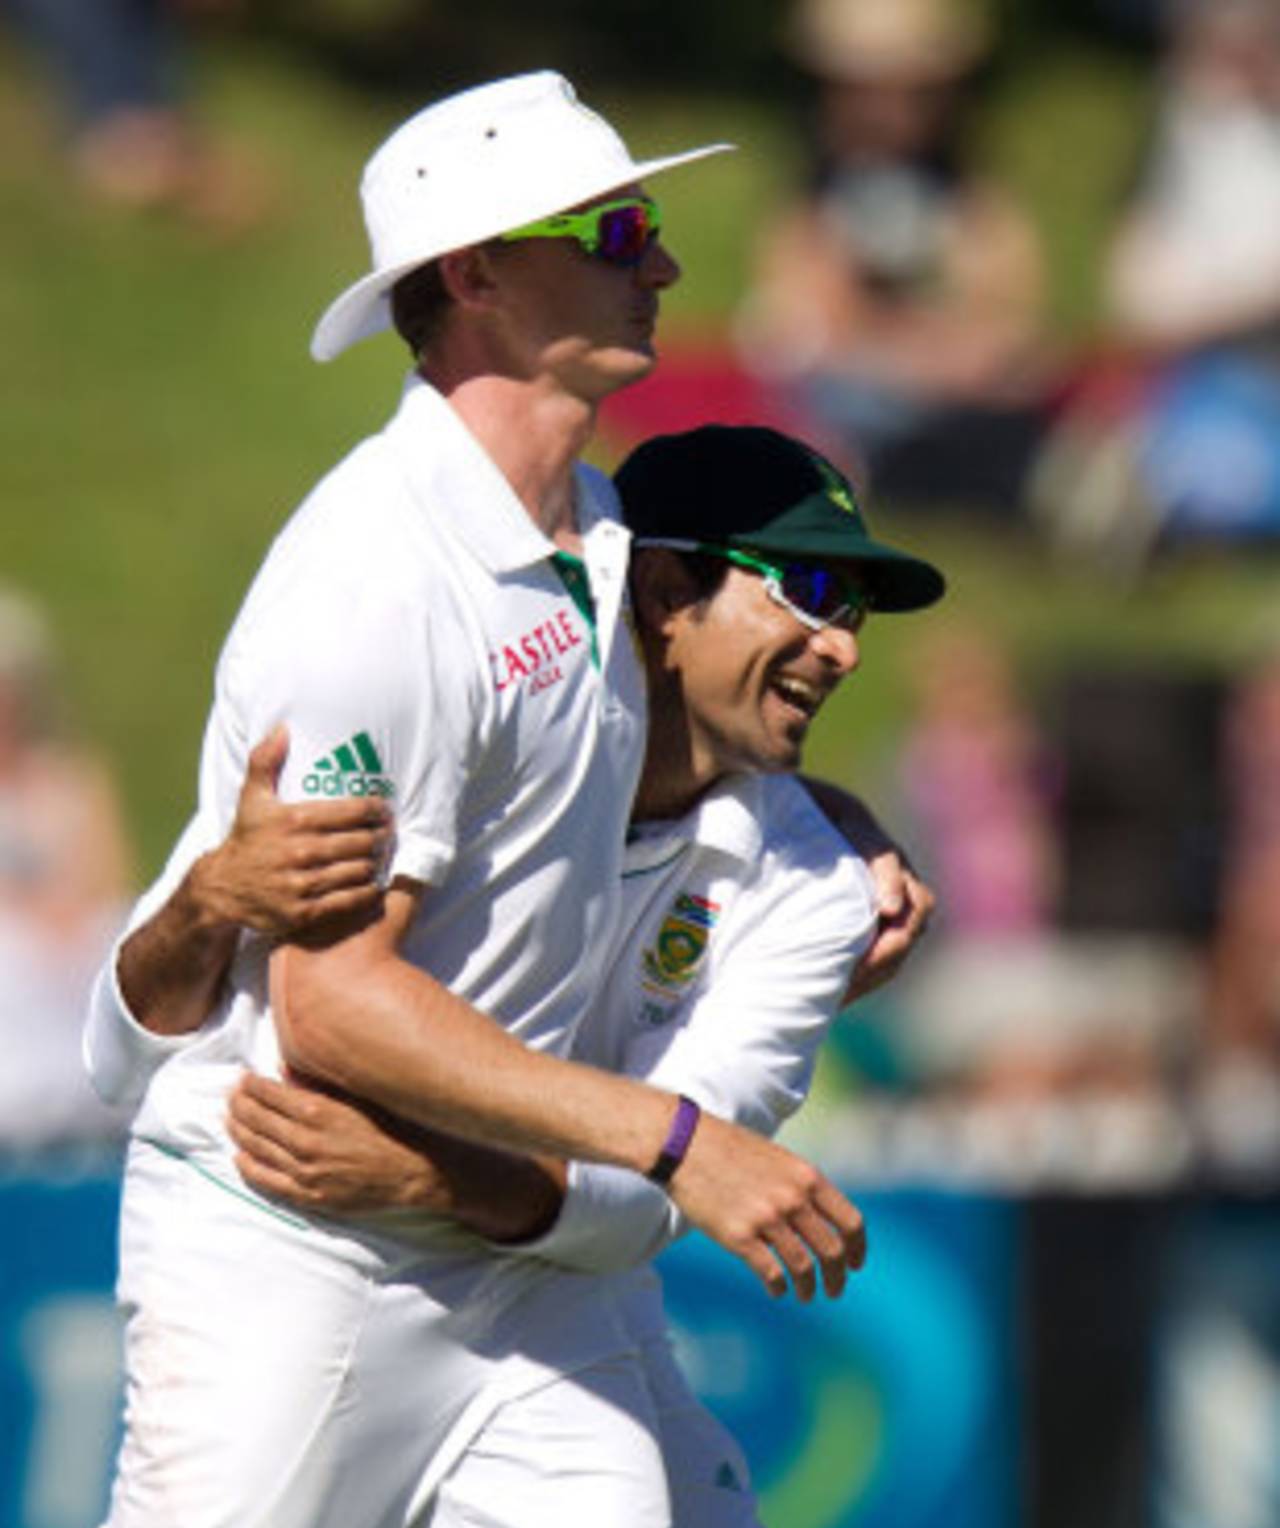 Dale Steyn gets a hug from Imran Tahir after completing a catch, New Zealand v South Africa, 3rd Test, Wellington, 4th day, March 26, 2012